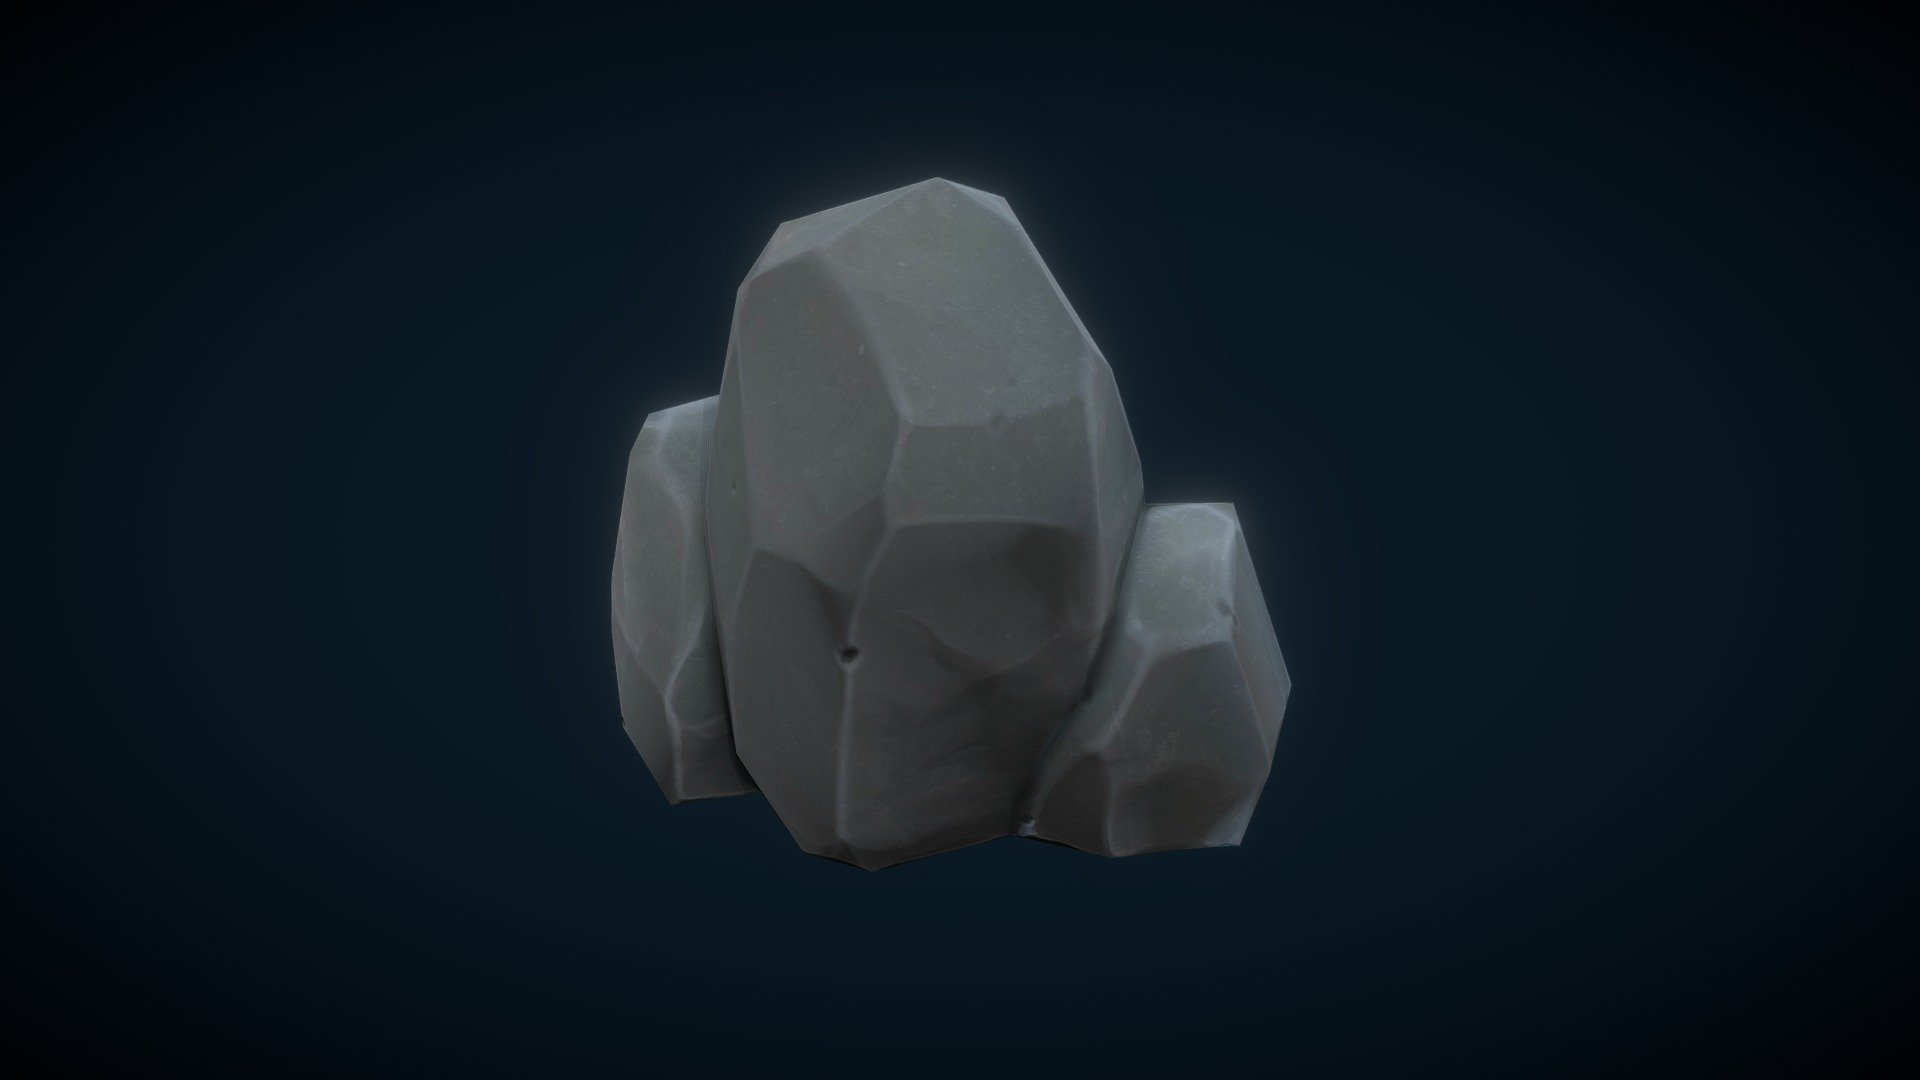 Stylized stone prop. Made in Zbrush with Decimation master, using &ldquo;How I make Stylized Rocks - The modeling and 3D Sculpting Process